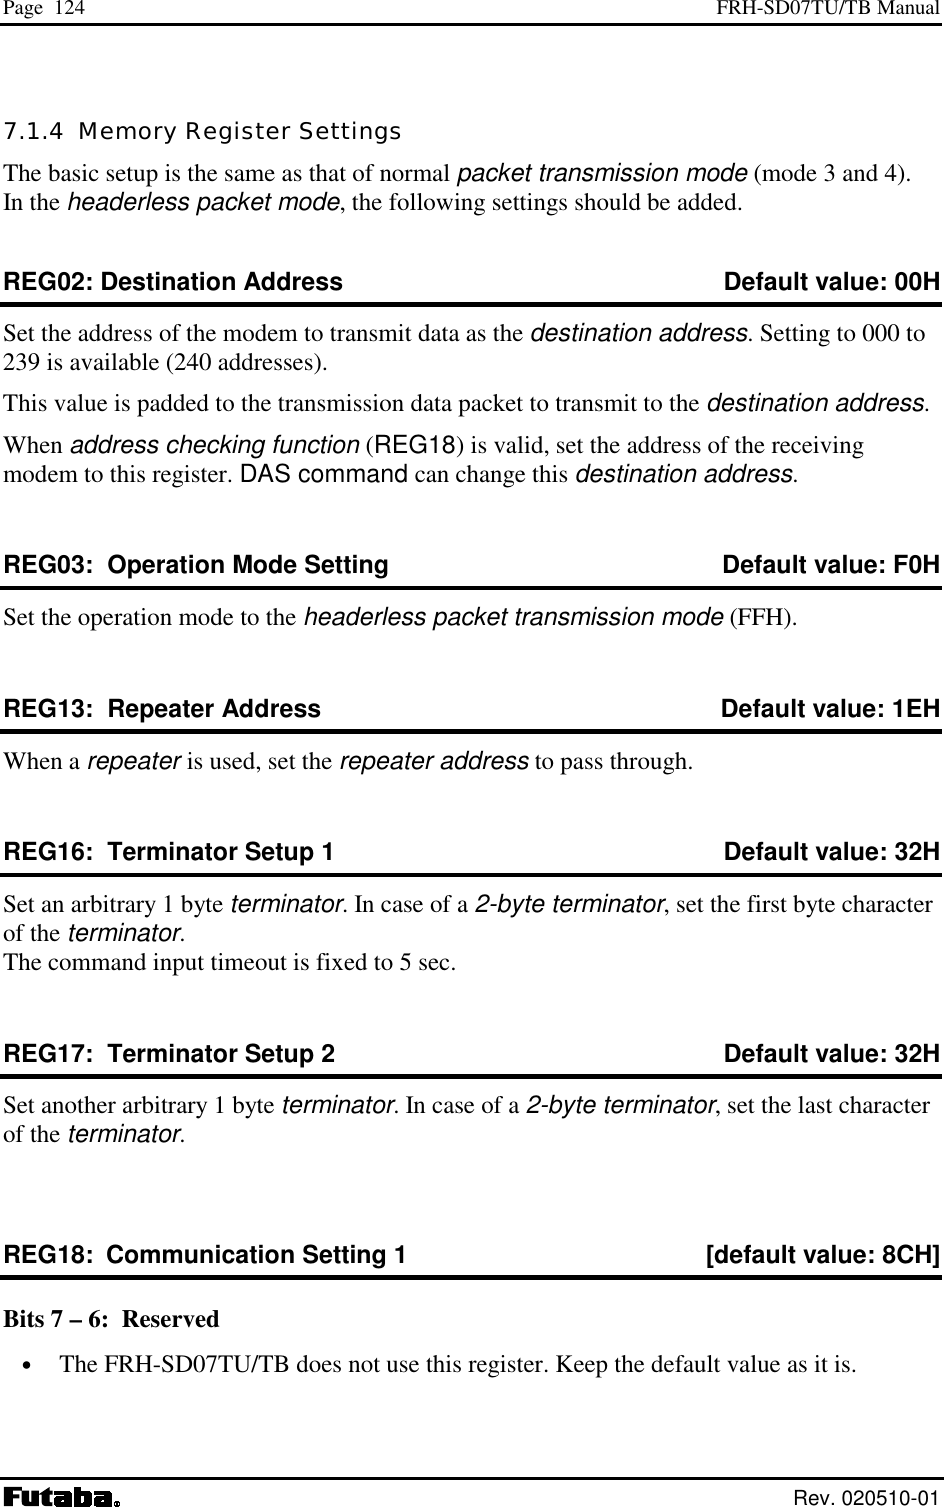 Page  124  FRH-SD07TU/TB Manual  Rev. 020510-01 7.1.4  Memory Register Settings The basic setup is the same as that of normal packet transmission mode (mode 3 and 4). In the headerless packet mode, the following settings should be added. REG02: Destination Address   Default value: 00H Set the address of the modem to transmit data as the destination address. Setting to 000 to 239 is available (240 addresses). This value is padded to the transmission data packet to transmit to the destination address.   When address checking function (REG18) is valid, set the address of the receiving modem to this register. DAS command can change this destination address. REG03:  Operation Mode Setting   Default value: F0H Set the operation mode to the headerless packet transmission mode (FFH). REG13:  Repeater Address   Default value: 1EH When a repeater is used, set the repeater address to pass through. REG16:  Terminator Setup 1  Default value: 32H Set an arbitrary 1 byte terminator. In case of a 2-byte terminator, set the first byte character of the terminator. The command input timeout is fixed to 5 sec. REG17:  Terminator Setup 2  Default value: 32H Set another arbitrary 1 byte terminator. In case of a 2-byte terminator, set the last character of the terminator.  REG18:  Communication Setting 1  [default value: 8CH] Bits 7 – 6:  Reserved •  The FRH-SD07TU/TB does not use this register. Keep the default value as it is. 